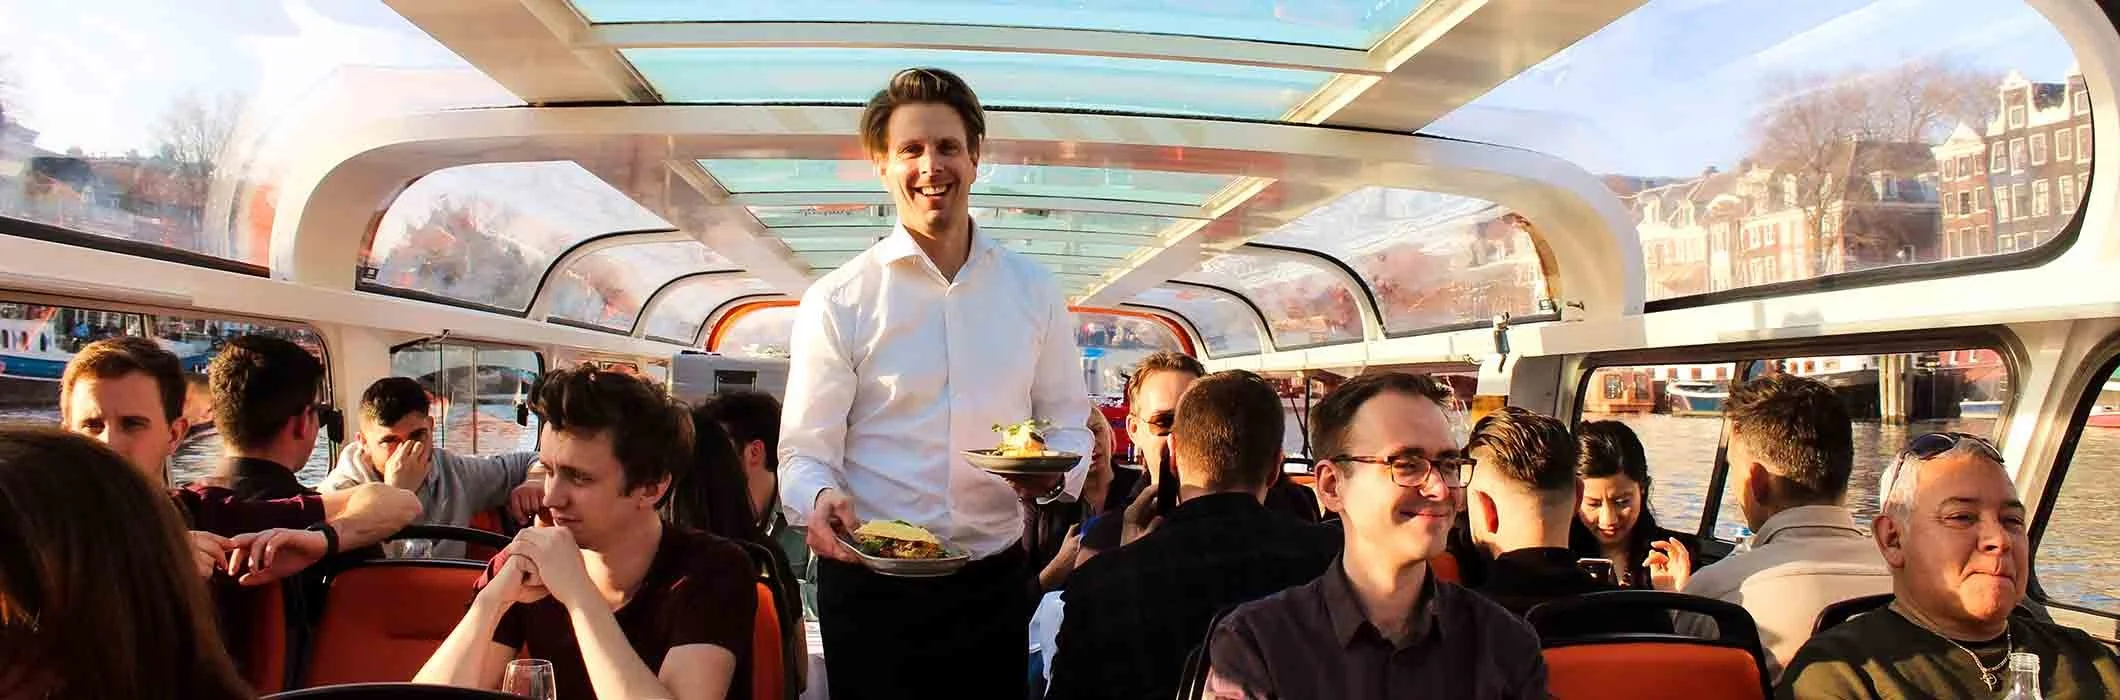 3-Course Dinner Cruise on Amsterdam’s Canals